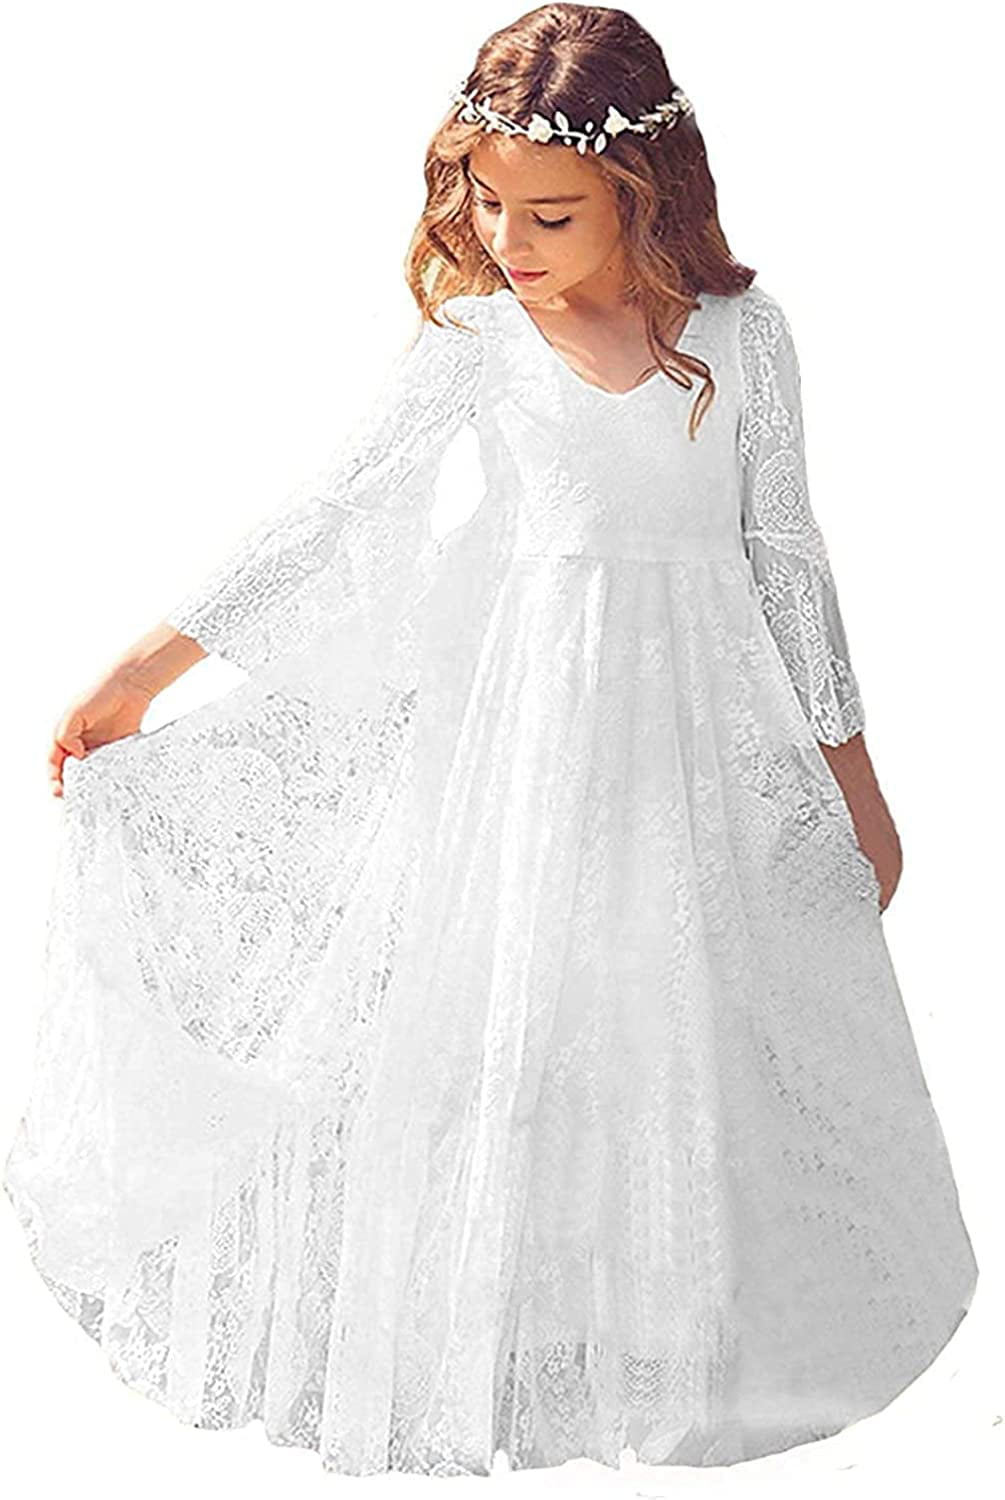 LACE AND NET  PARTY FORMAL FLOWER GIRL  WEDDING PRINCESS DRESS AGE 2-12 